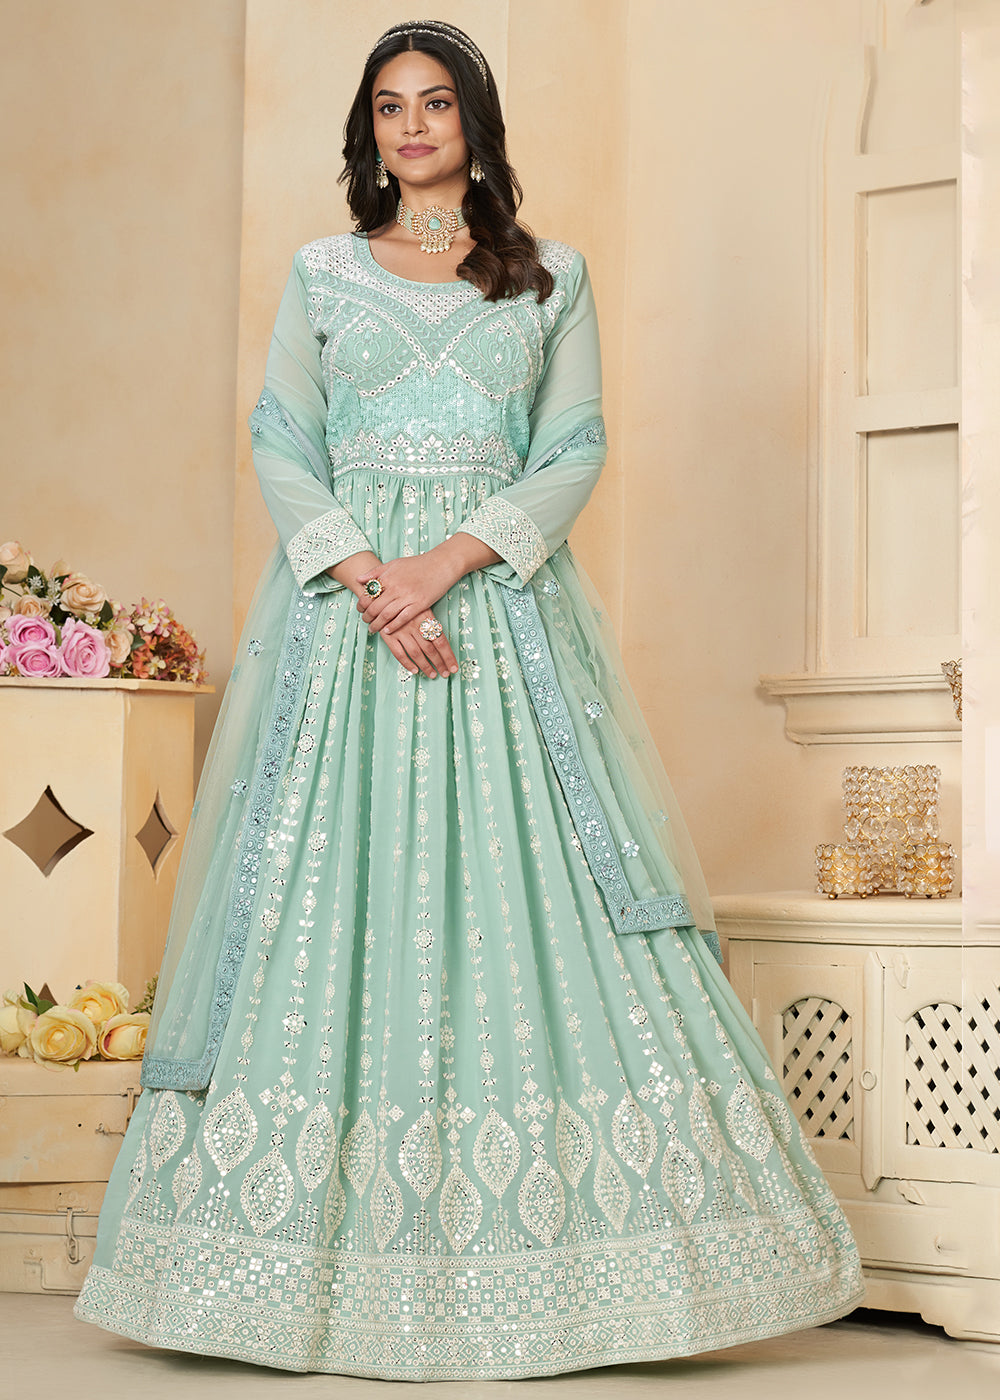 Buy Now Aqua Blue Georgette Embroidered Wedding Anarkali Suit Online in USA, UK, Australia, New Zealand, Canada & Worldwide at Empress Clothing. 